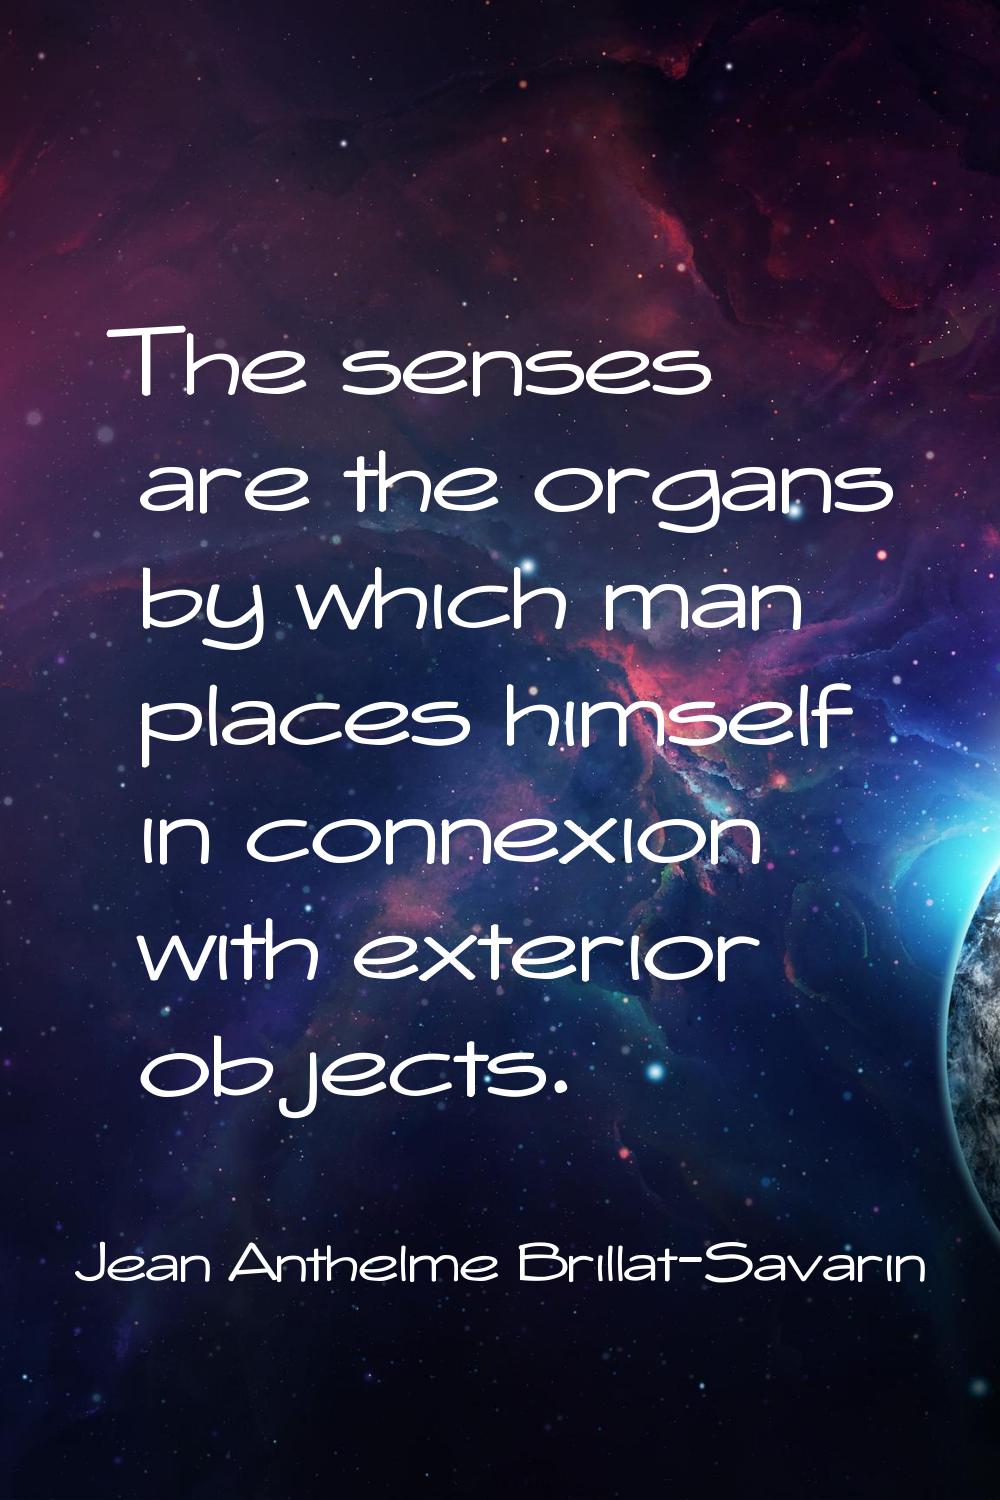 The senses are the organs by which man places himself in connexion with exterior objects.